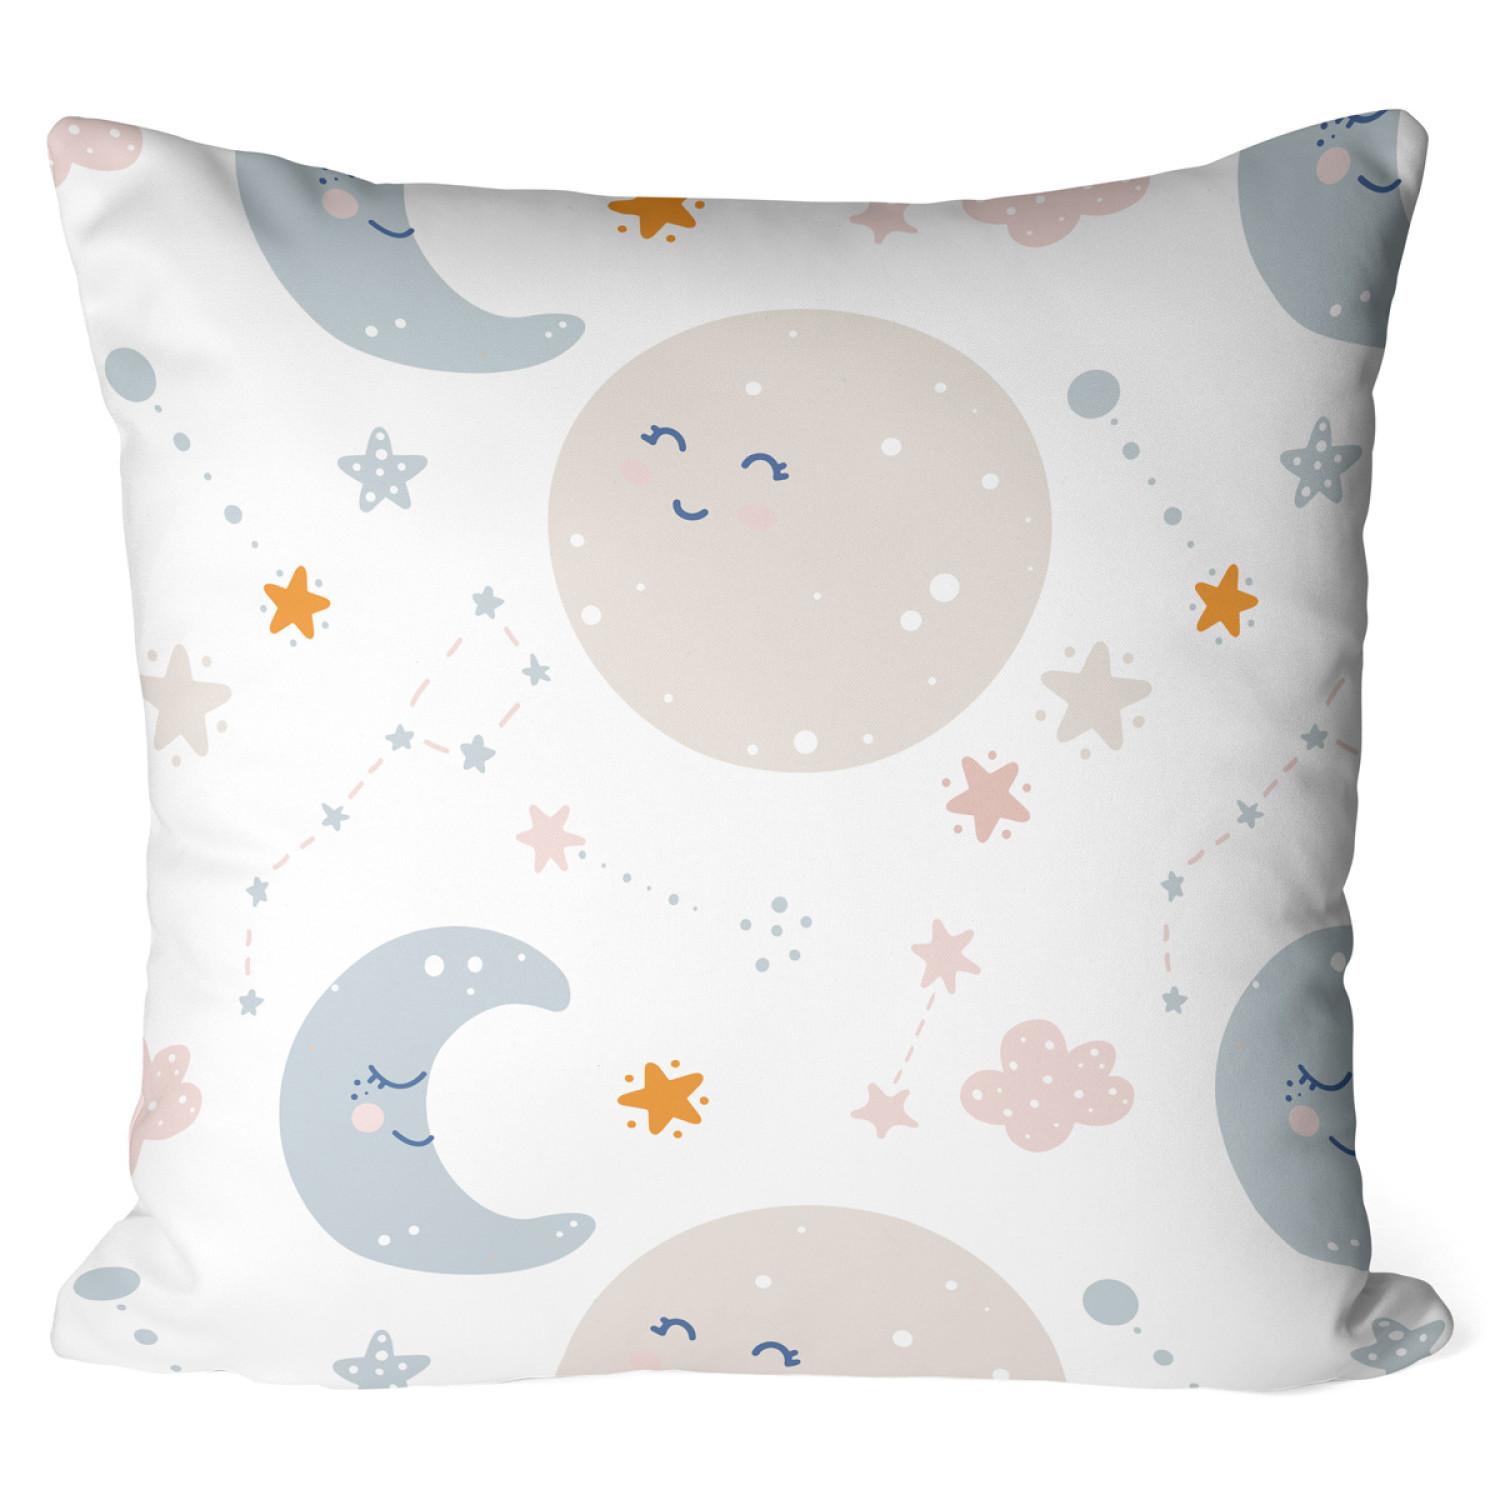 Decorative Microfiber Pillow Joyful sky - moon, clouds and stars motif on a bright background cushions